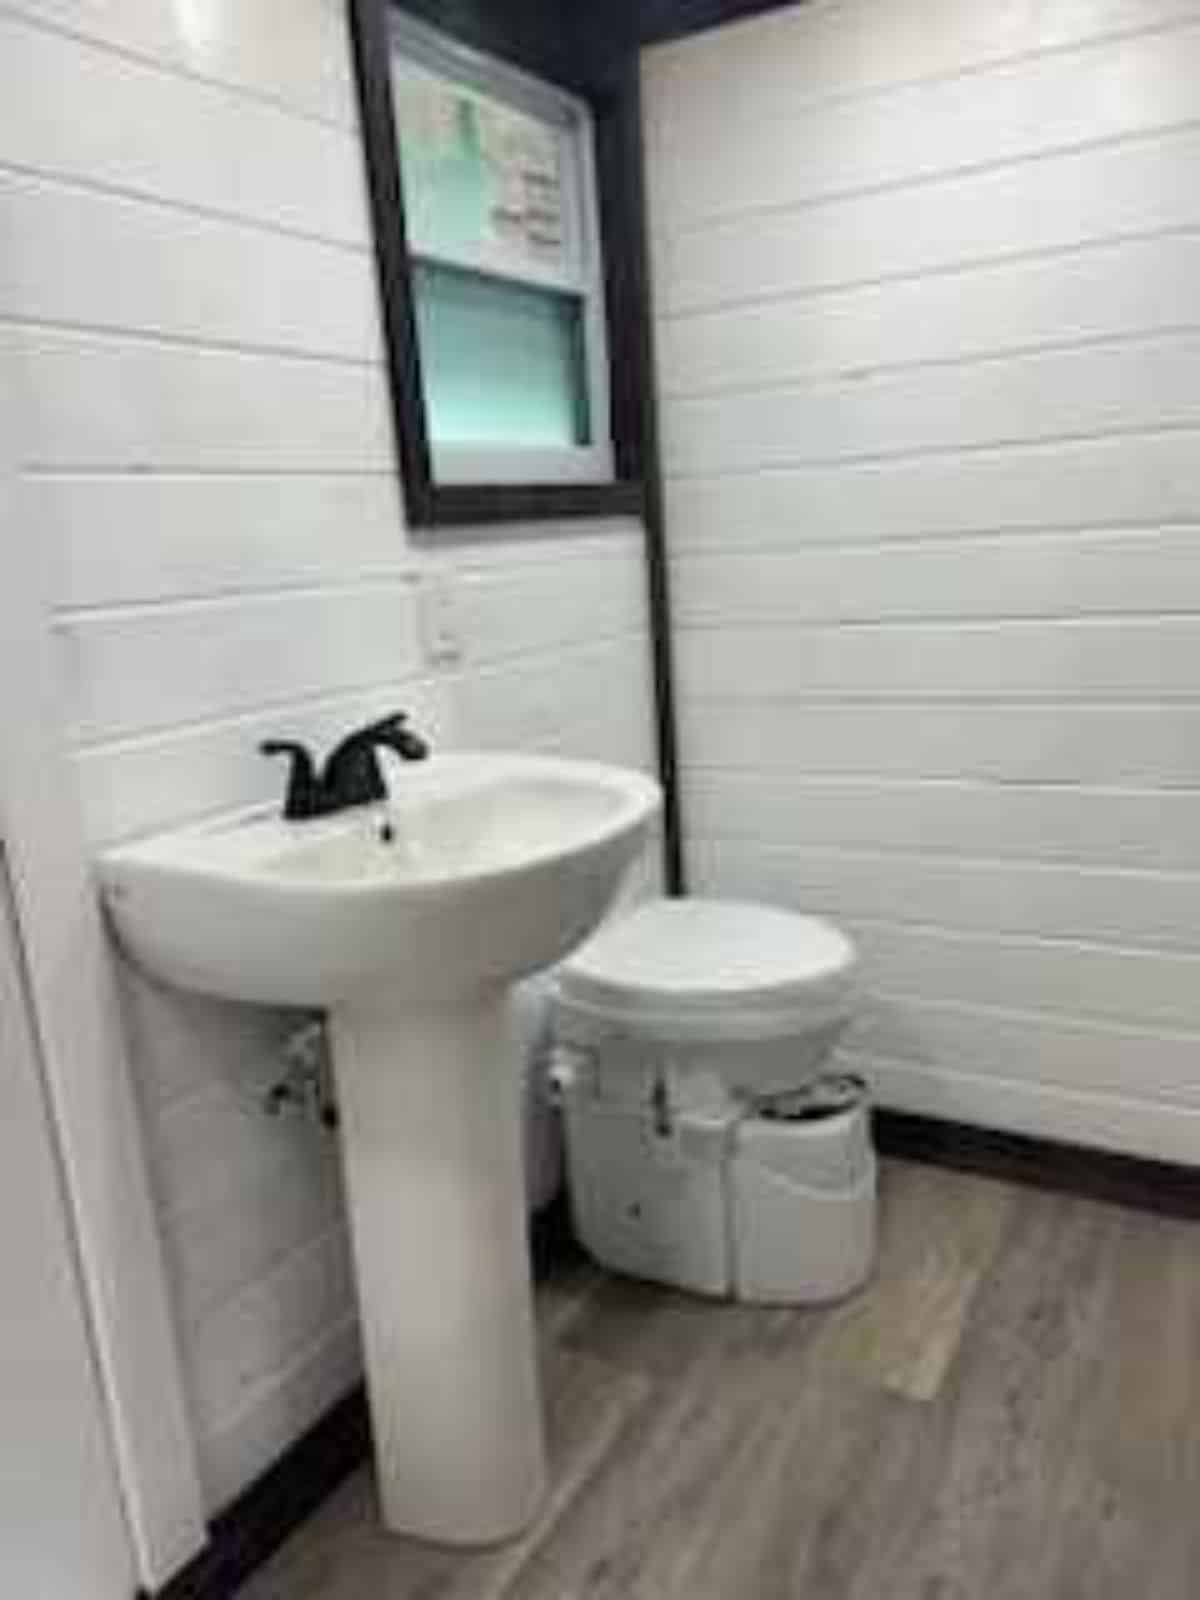 Standard toilet and sink in bathroom of 1 Bed Tiny Home